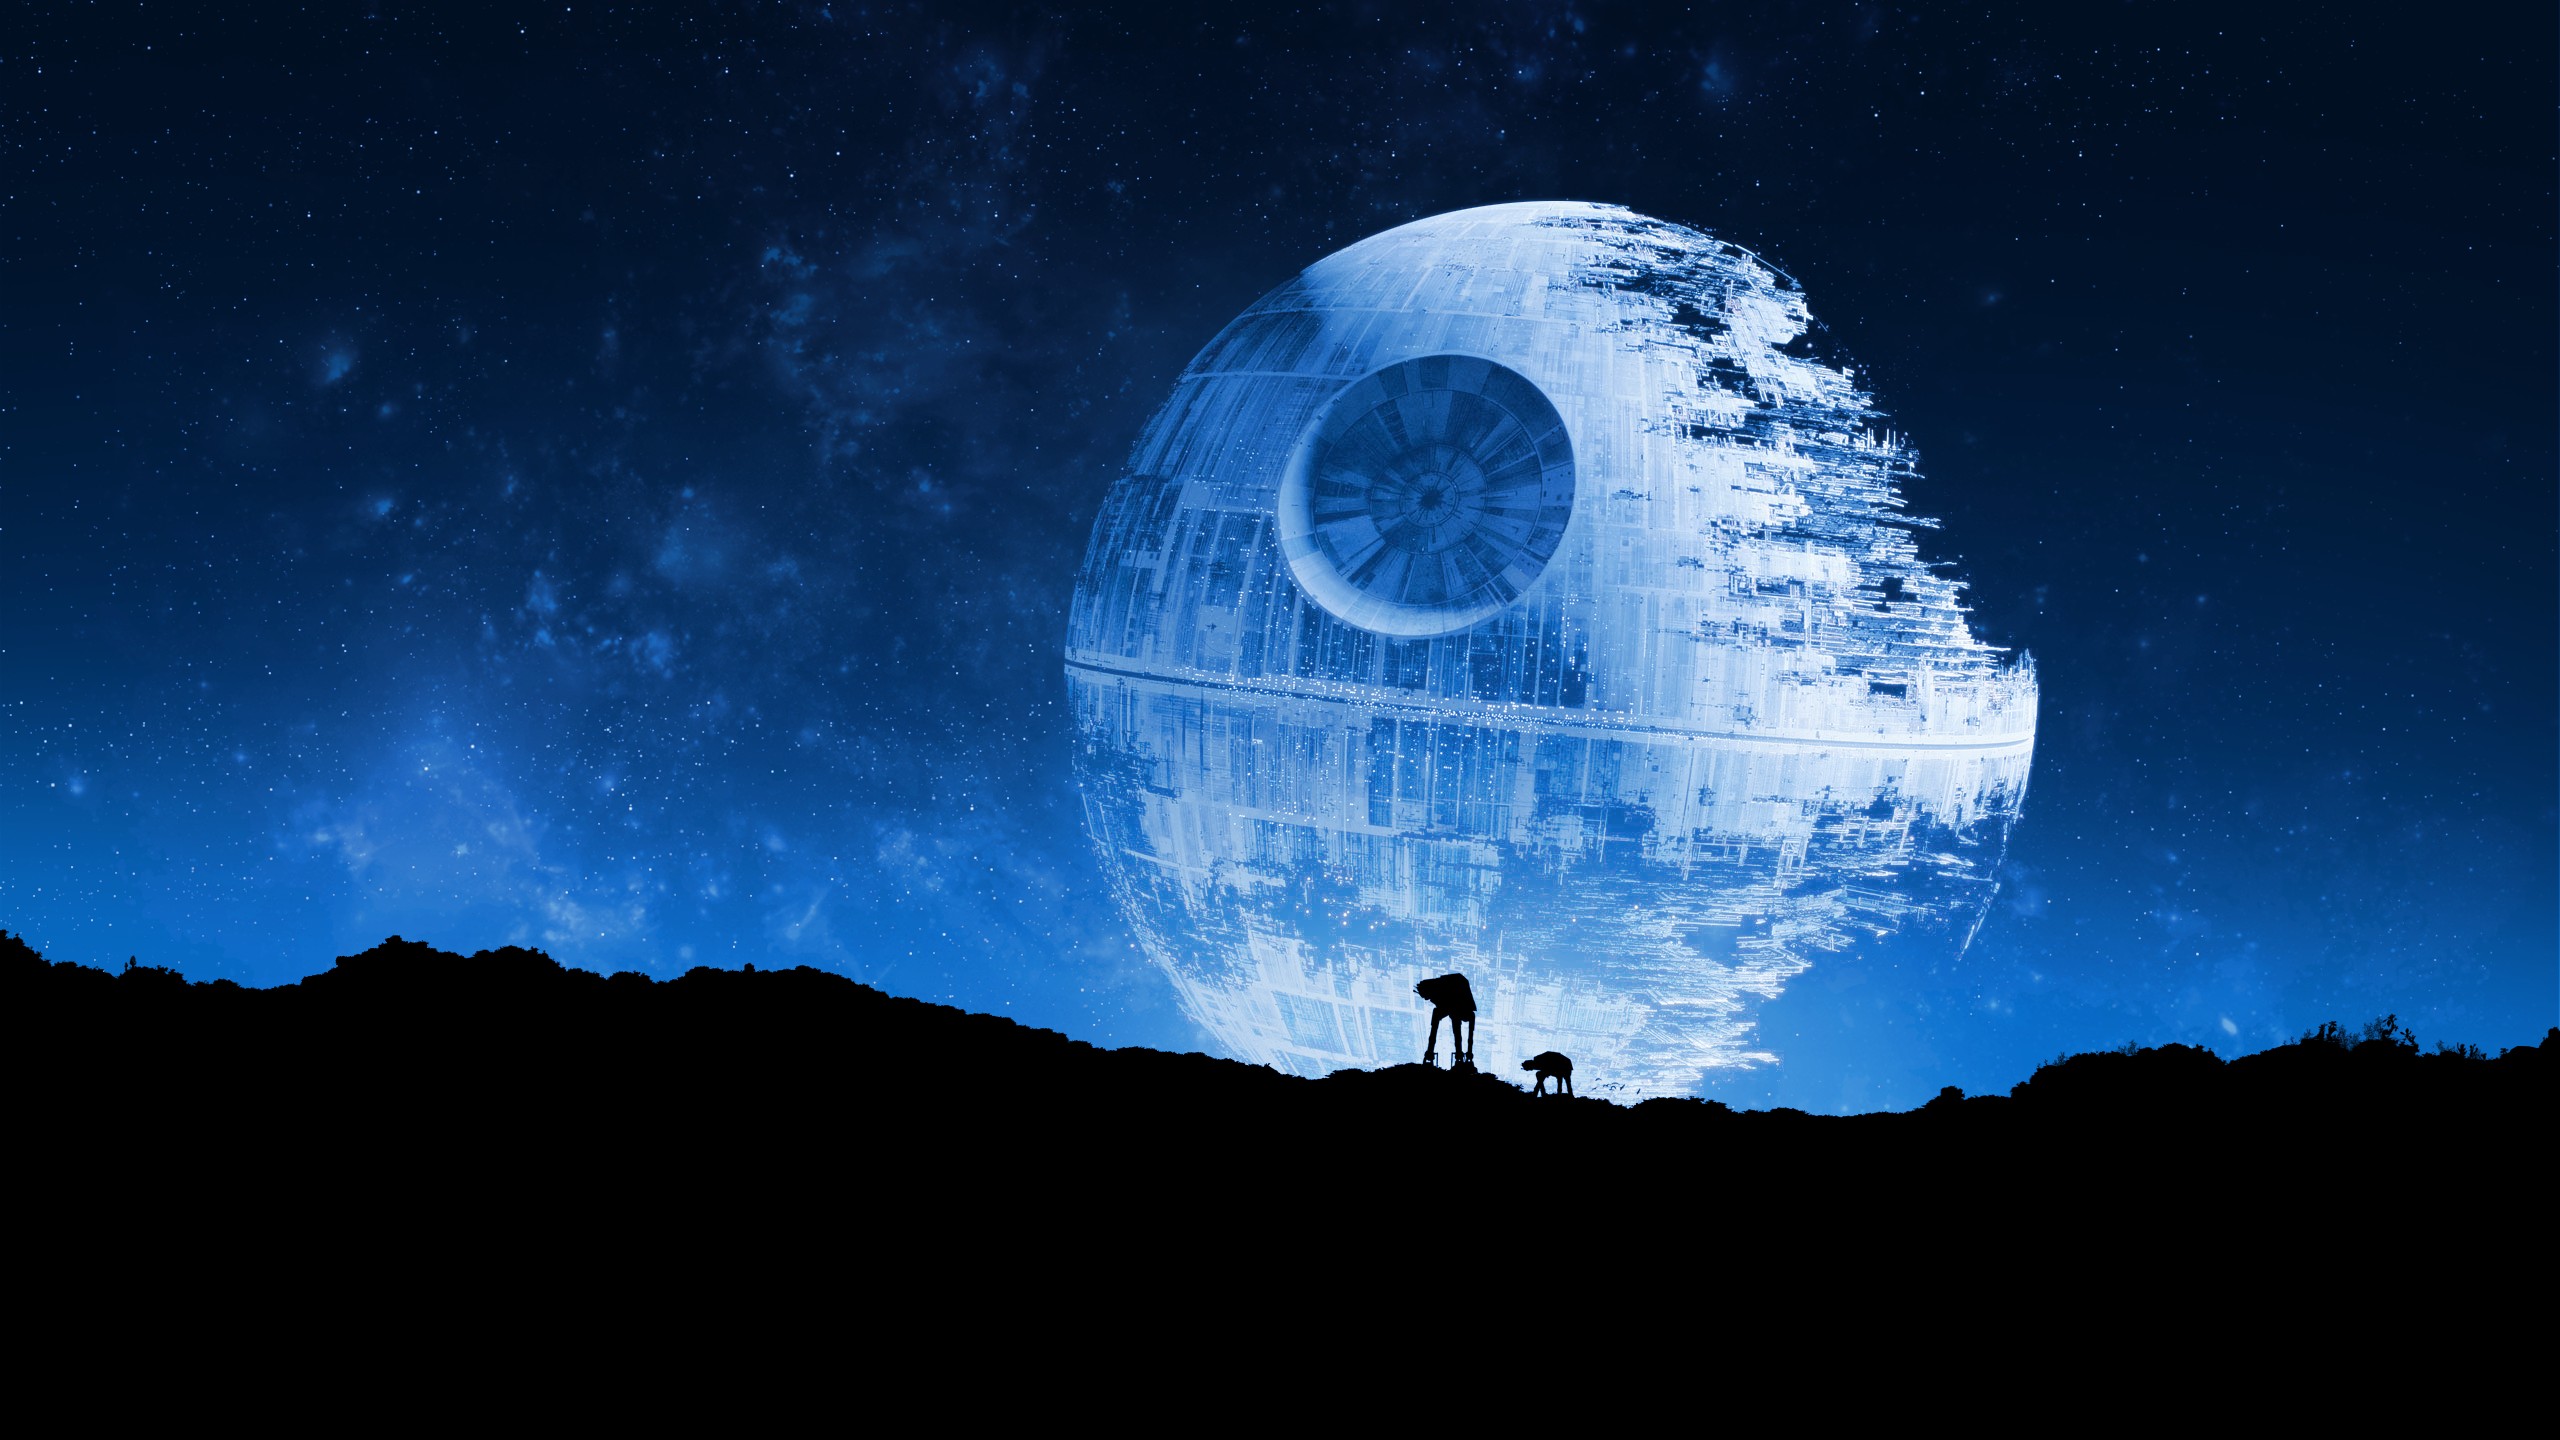 Star Wars, Death Star, AT AT, Space, Night sky Wallpapers HD / Desktop and Mobile